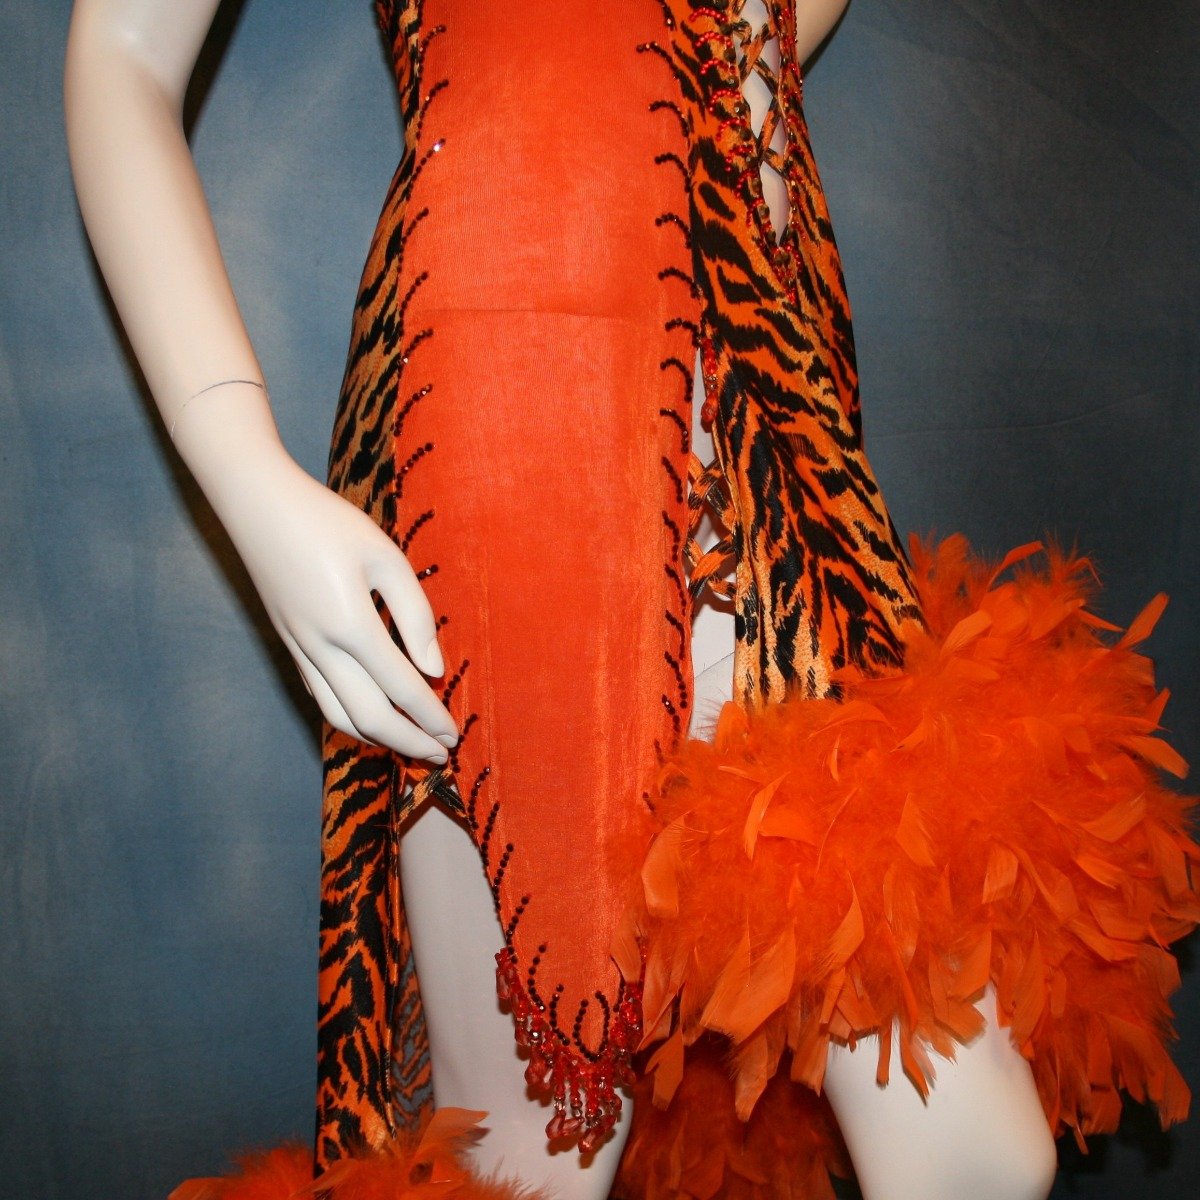 Crystal's Creations close up side view of Tiger print & orange Latin/rhythm dress created of tiger print lycra & luxurious orange solid slinky has color blocking, lattice work detailing in front bodice, split sides & low back, as well as intriguing longer back skirting, adorned with orange chandelle feathers, also features detailed Swarovski rhinestone work!